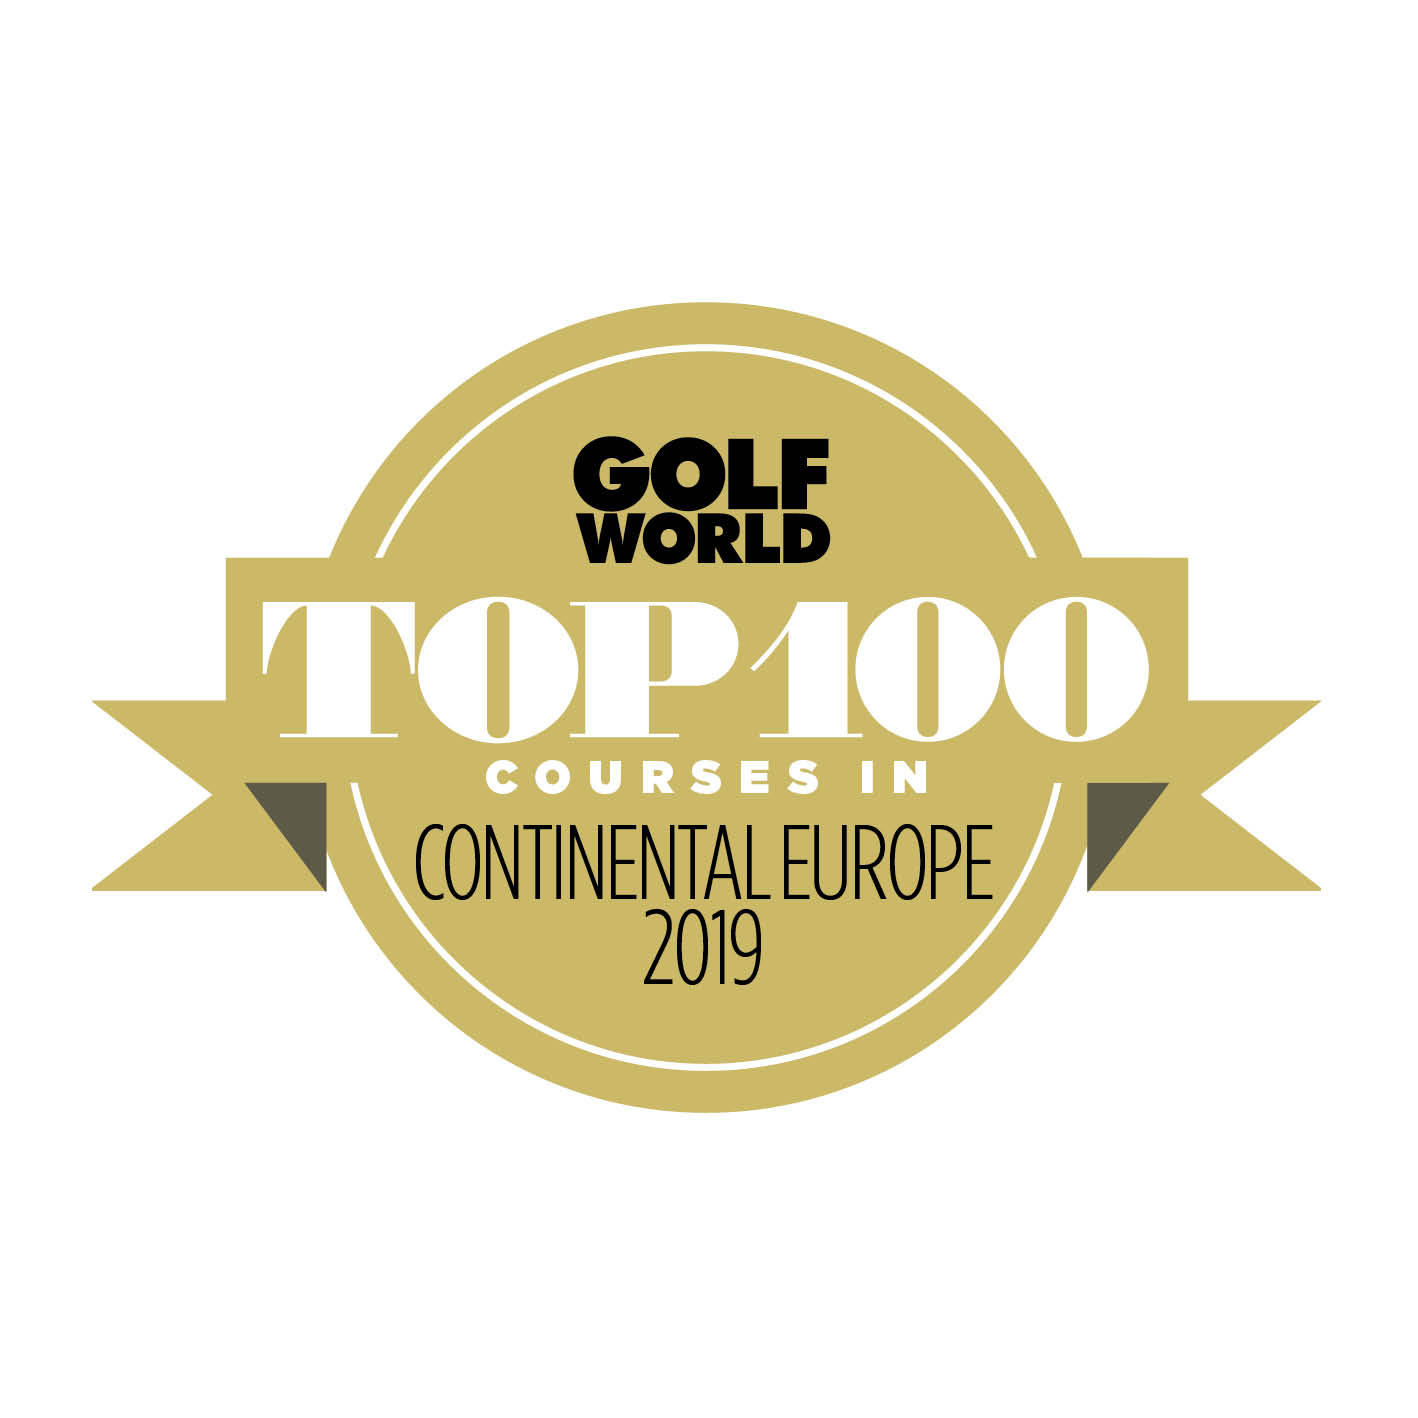 TOP 100 COURSES